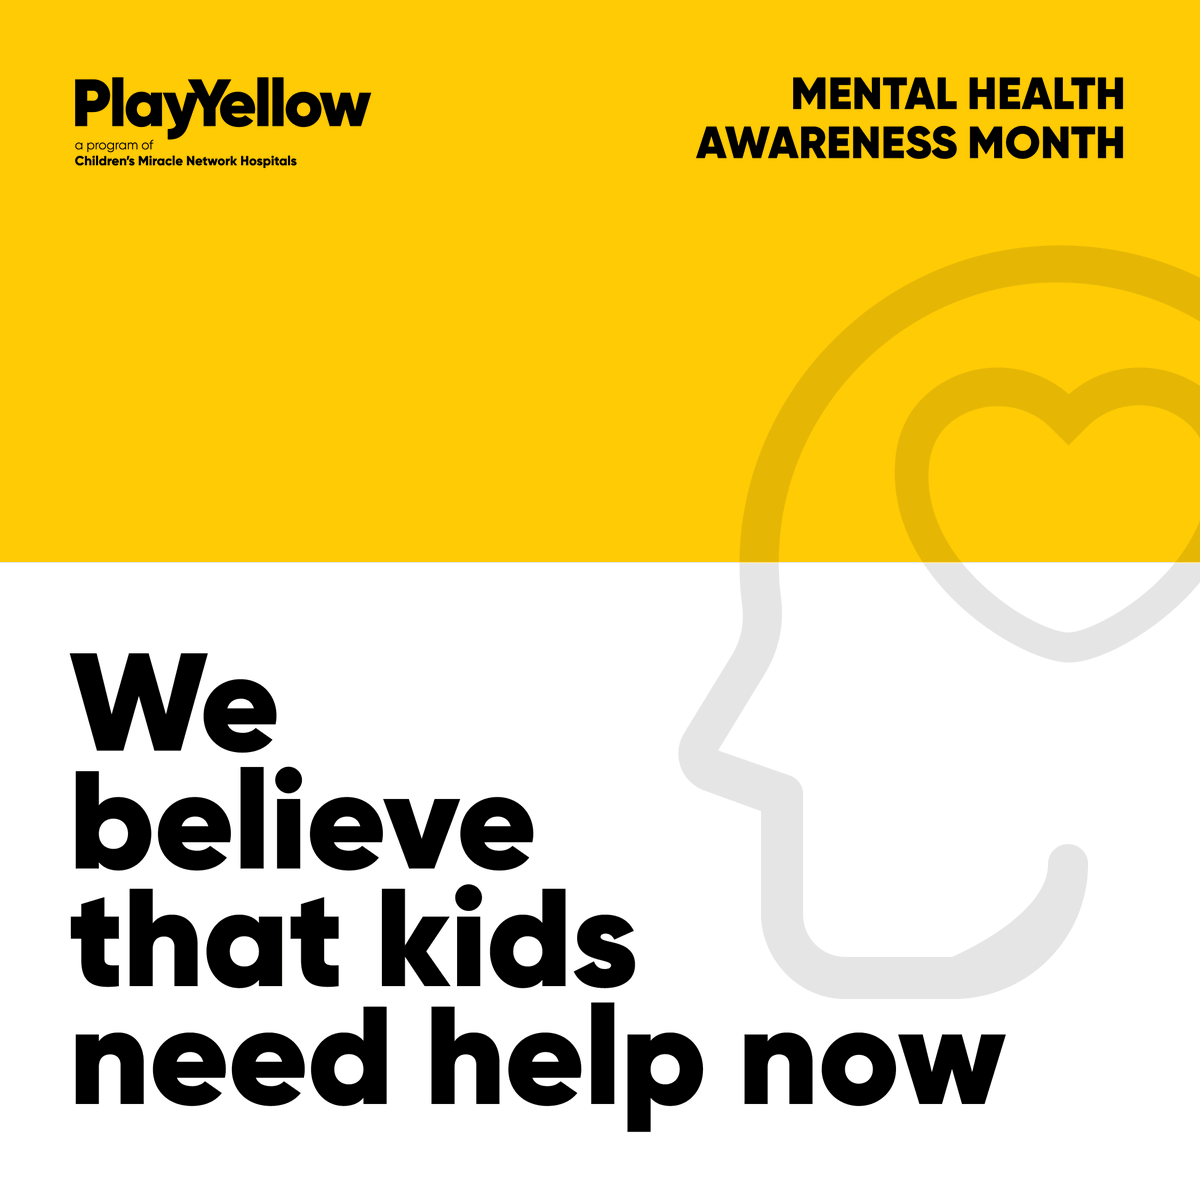 Committed to securing a healthy future for every child, we prioritize mental and behavioral health. All our U.S. member hospitals provide a range of mental health services, from clinical care to community education. #PlayYellow #MentalHealthAwarenessMonth